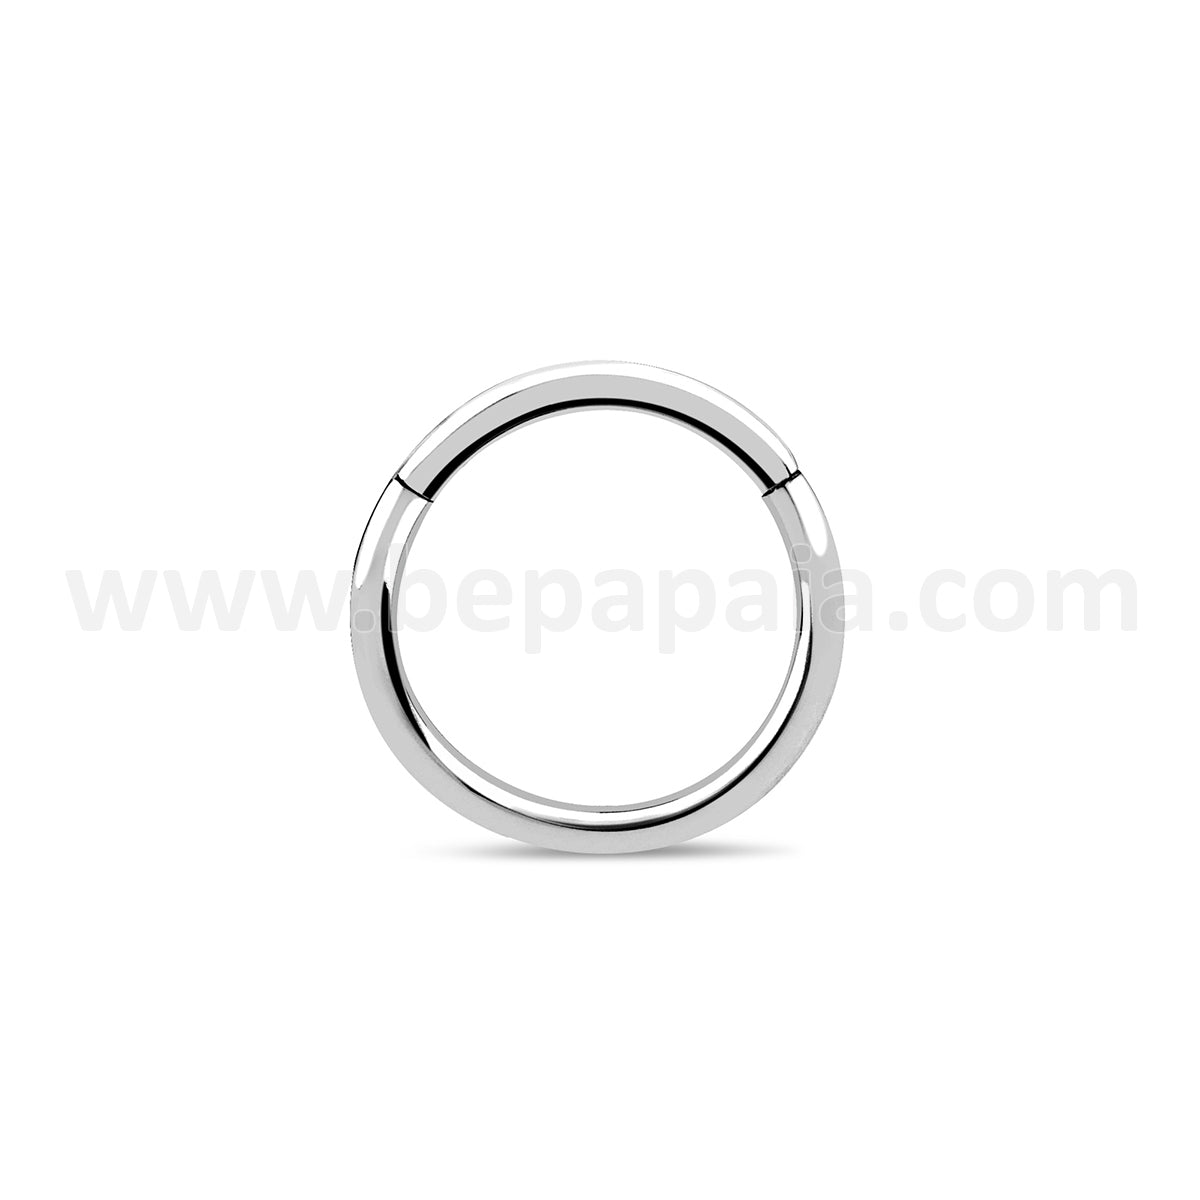 Surgical steel hinged segment ring 1.2x8,10mm